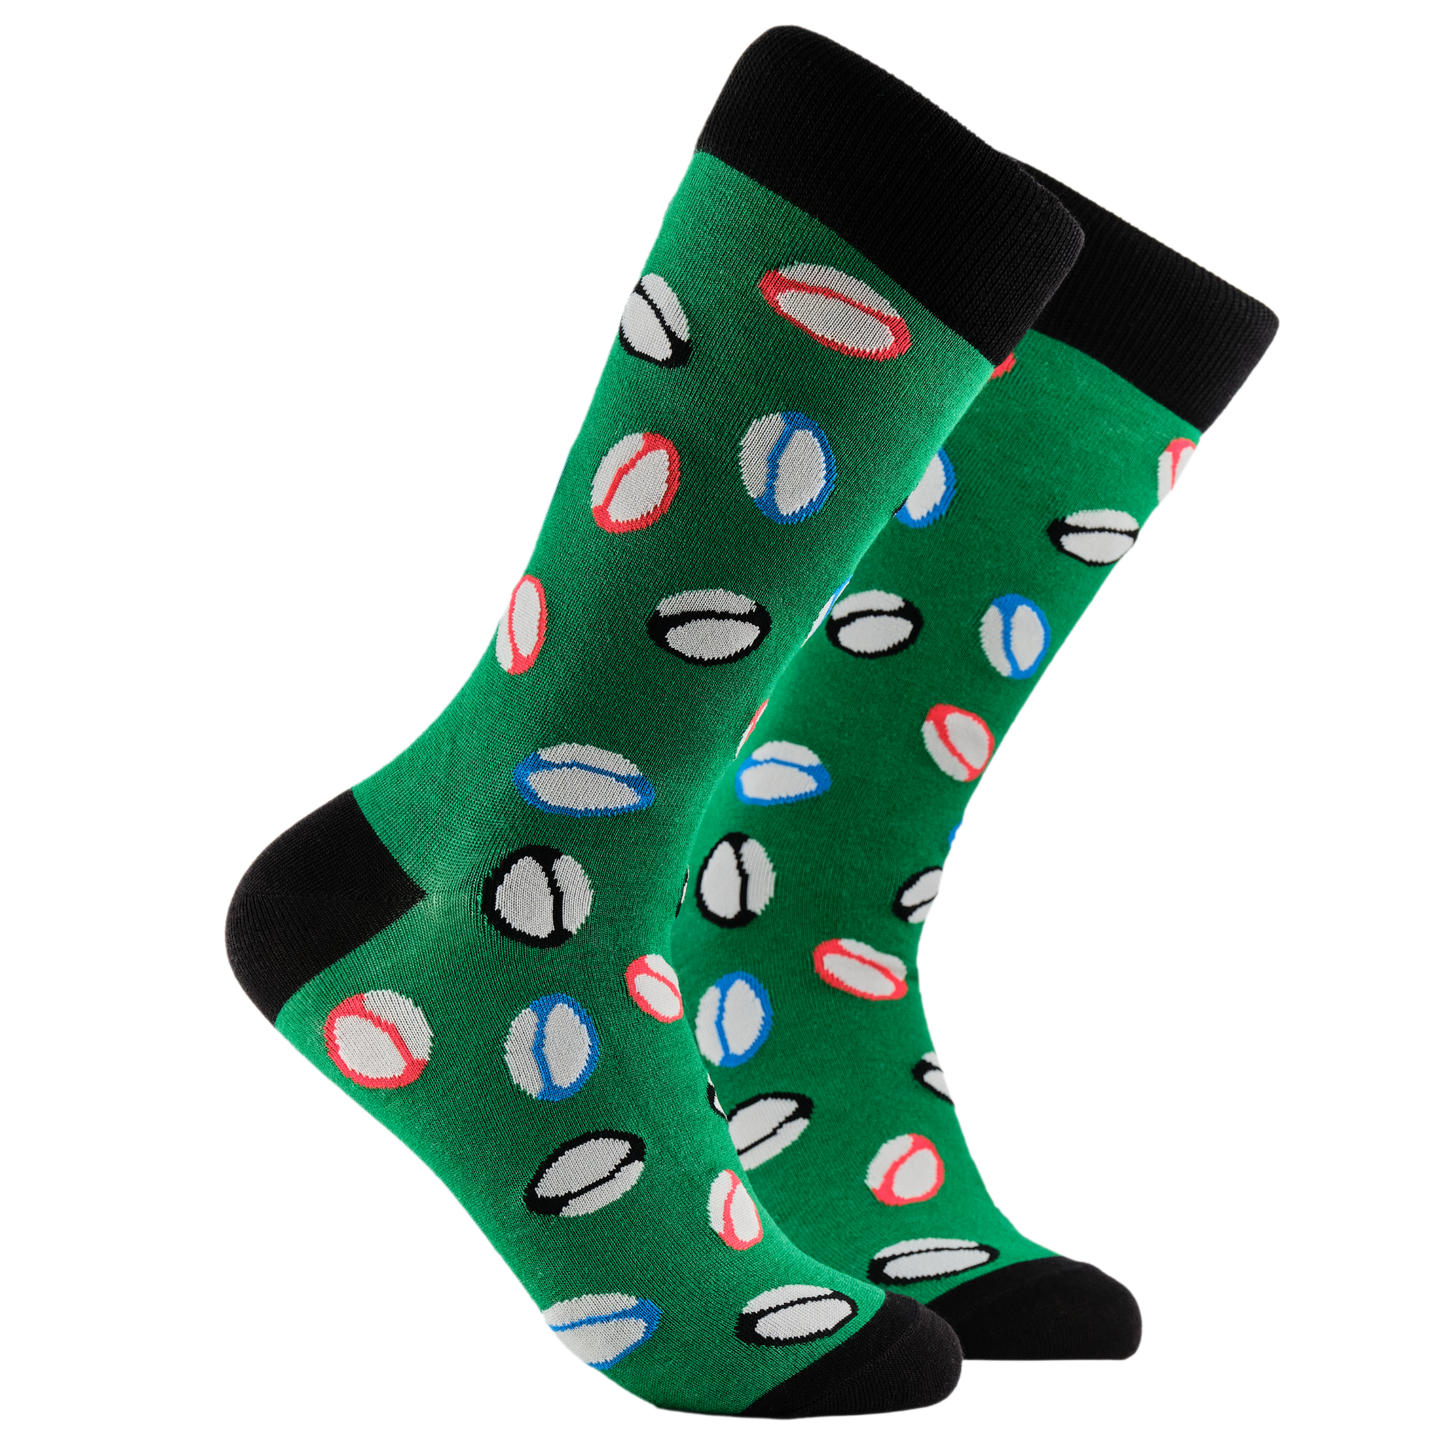 Rugby Bamboo Socks. A pair of socks depicting rugby balls. Green legs, black cuff, heel and toe.